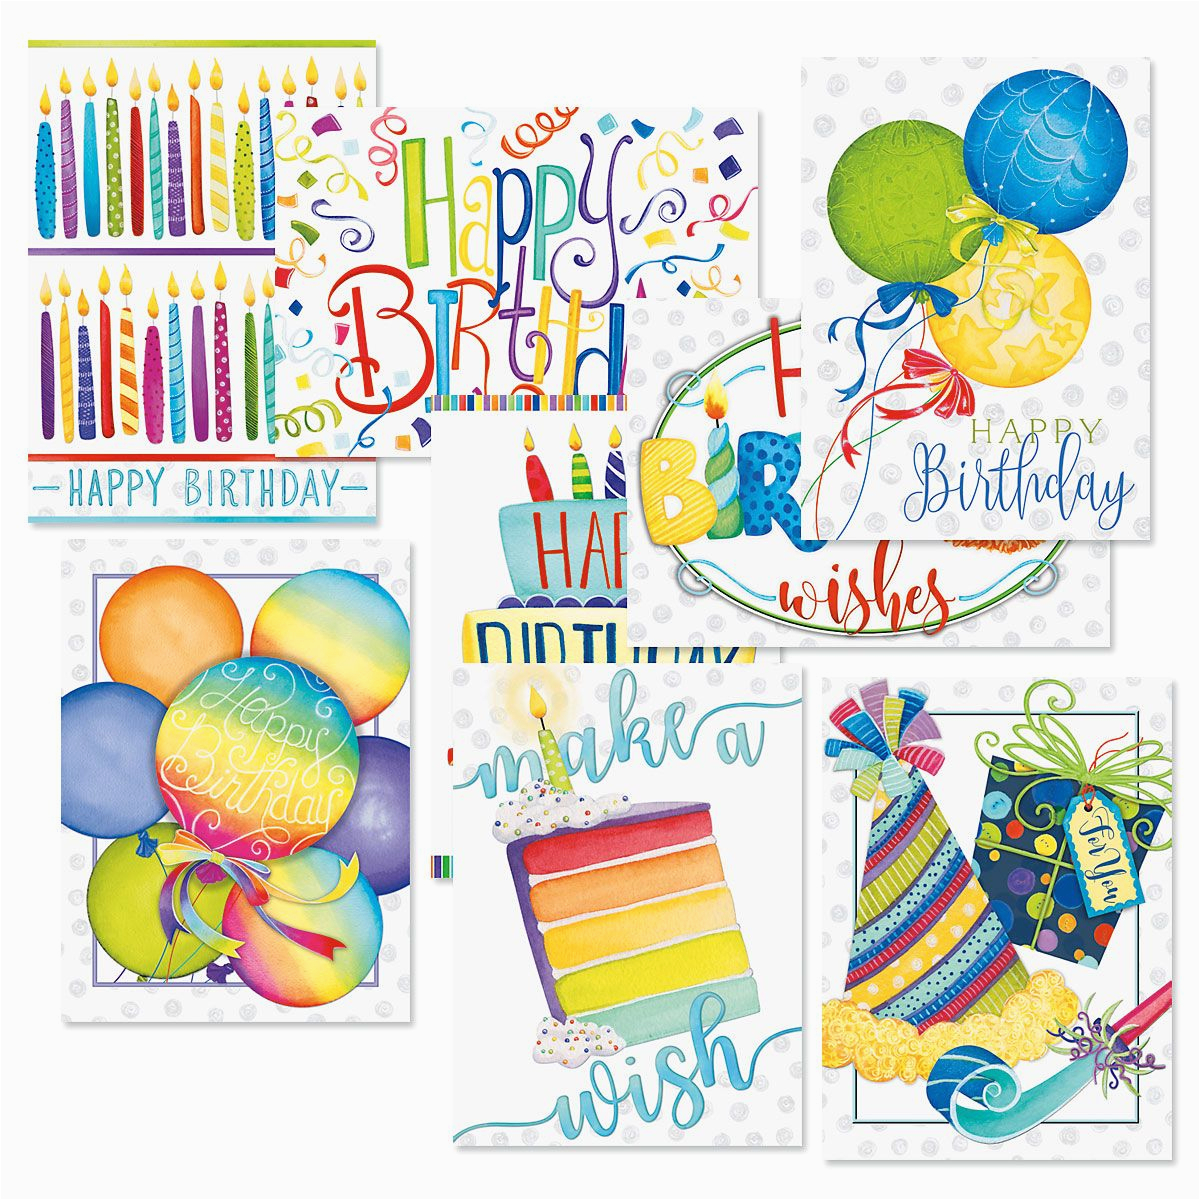 make a wish birthday greeting cards value pack current